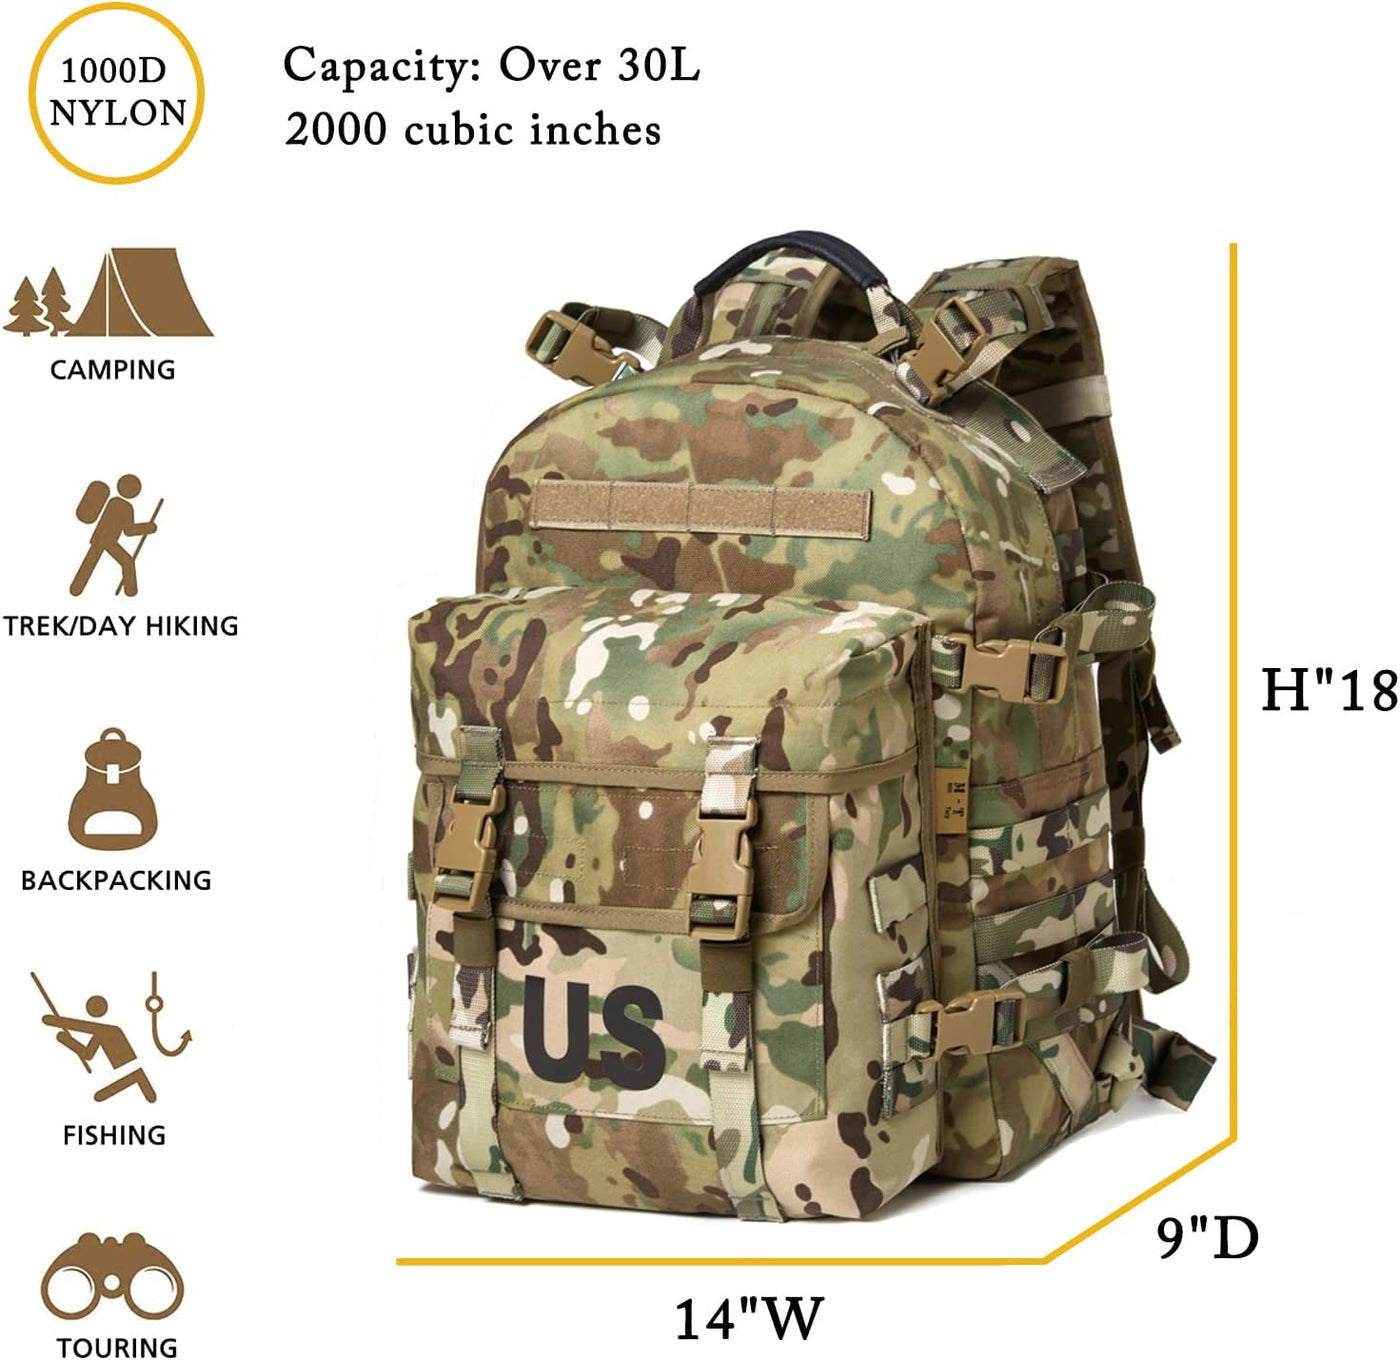 Mil-Spec MOLLE DAY PACK - OCP